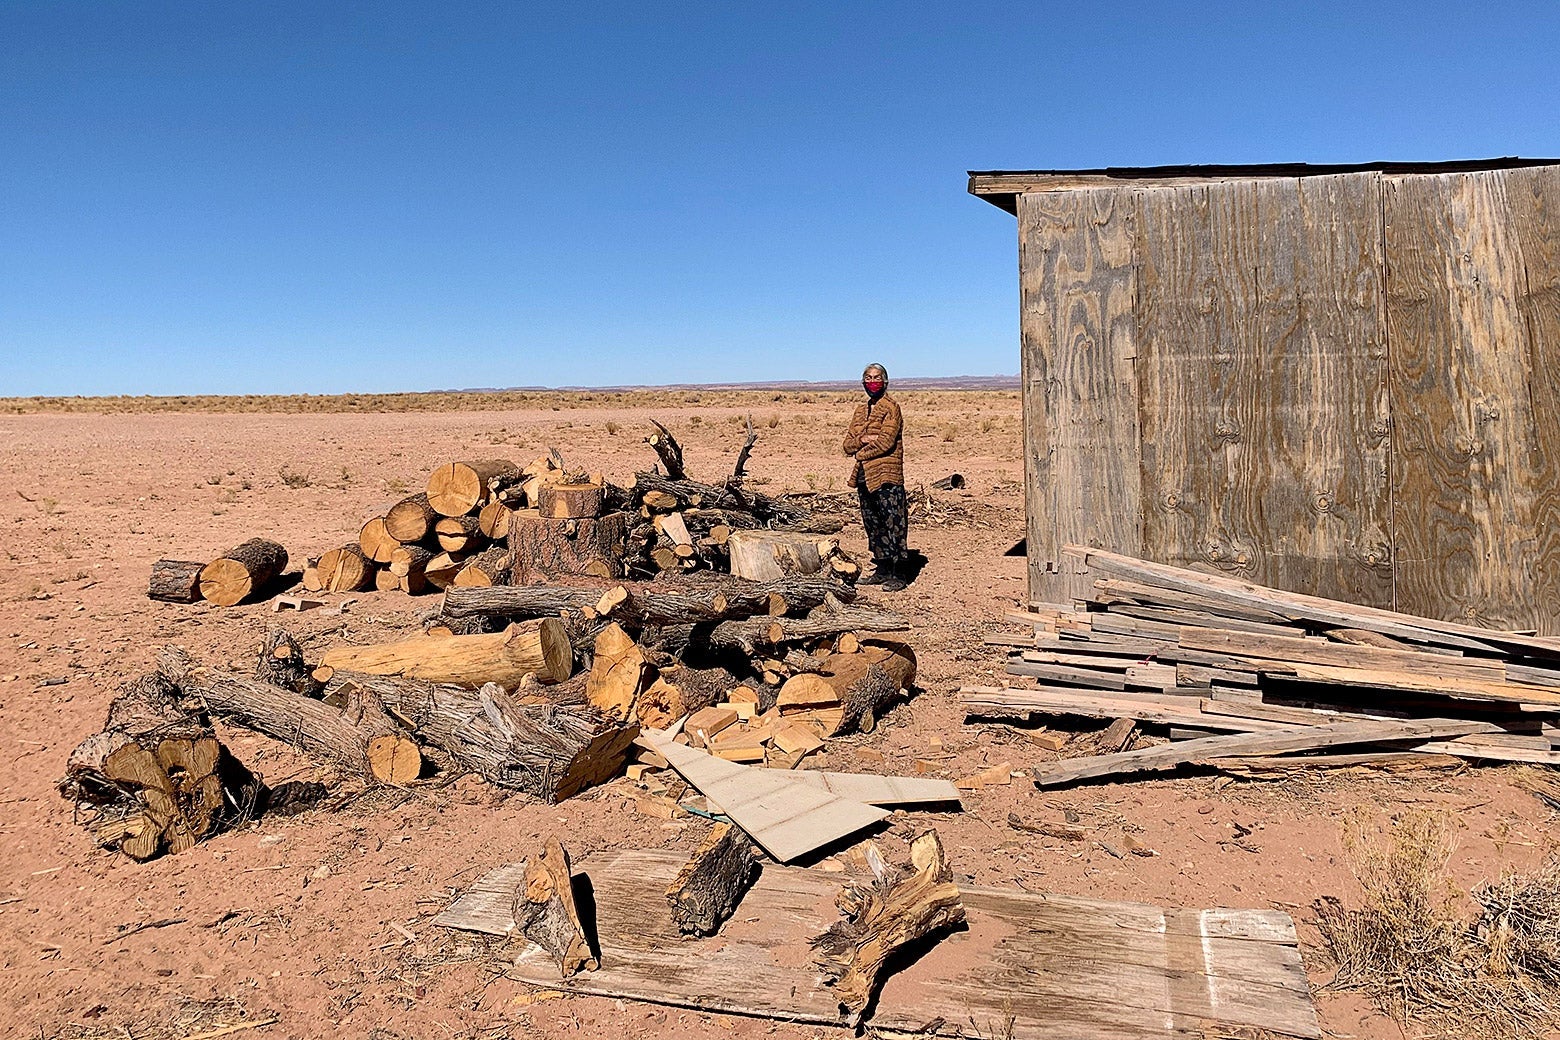 A Navajo woman standing in front of a large pile of firewood in a dry landscape